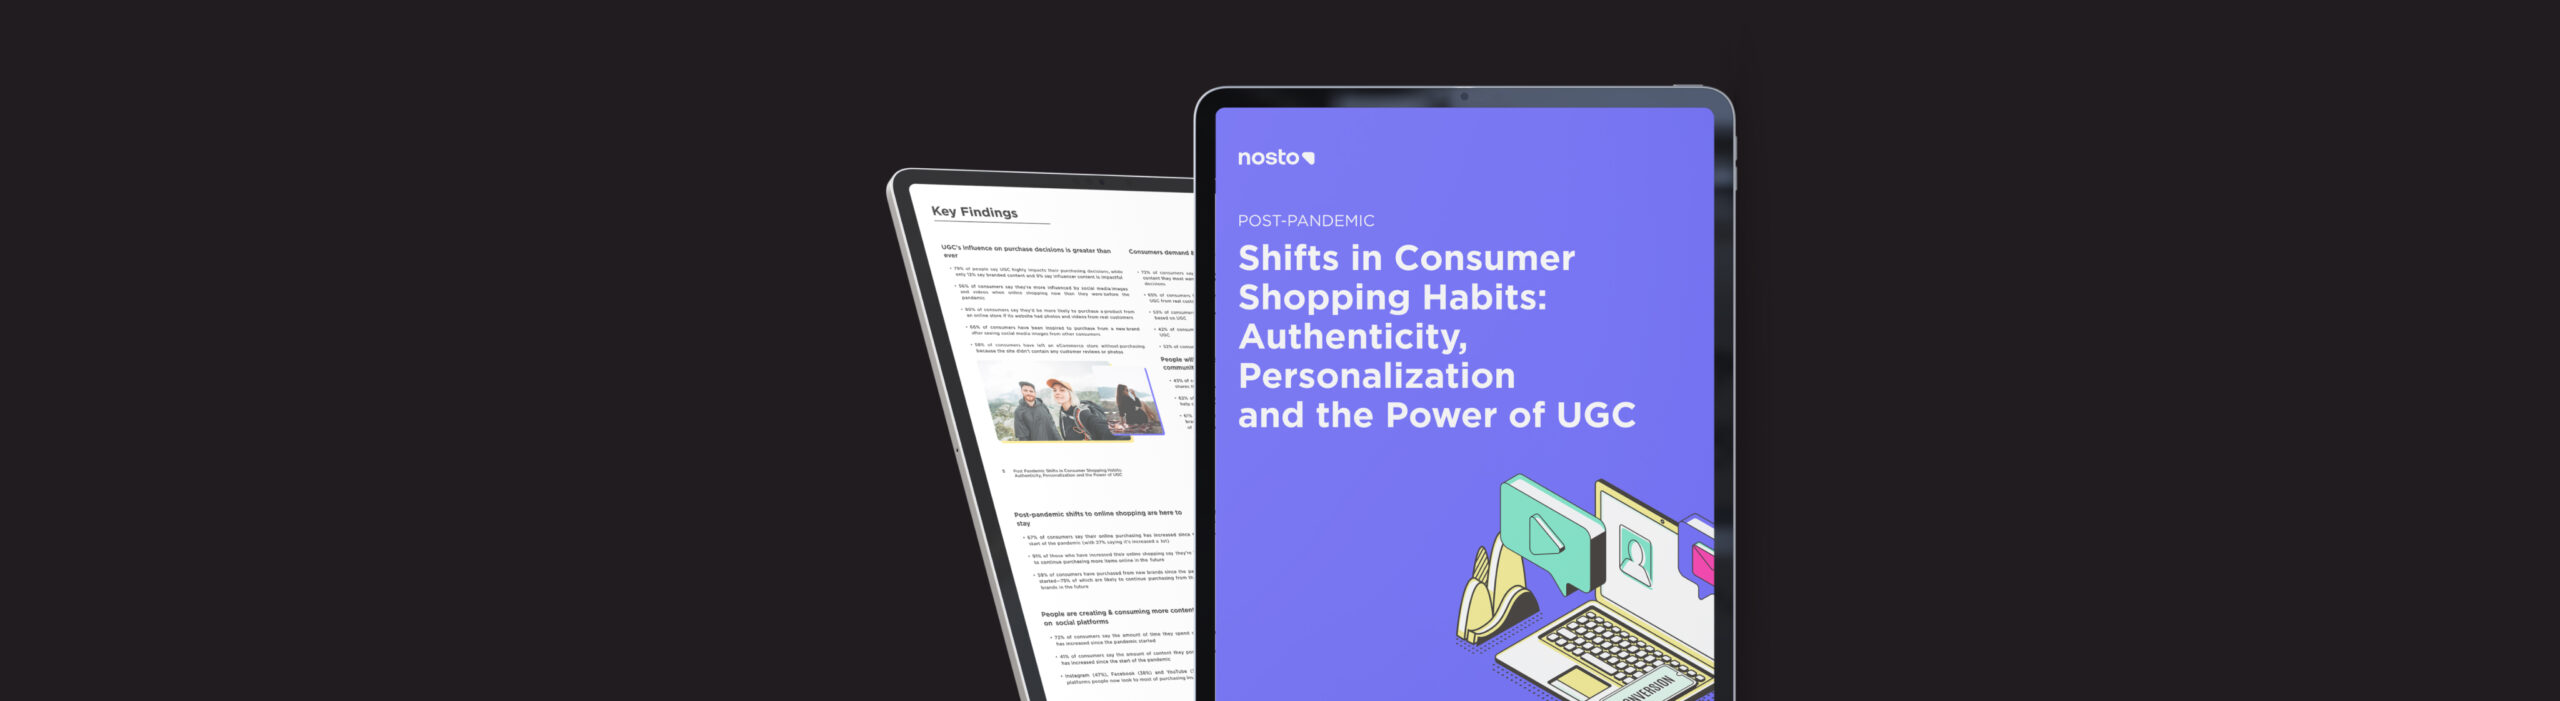 Post-Pandemic Shifts in Consumer Shopping Habits: Authenticity, Personalization and the Power of UGC